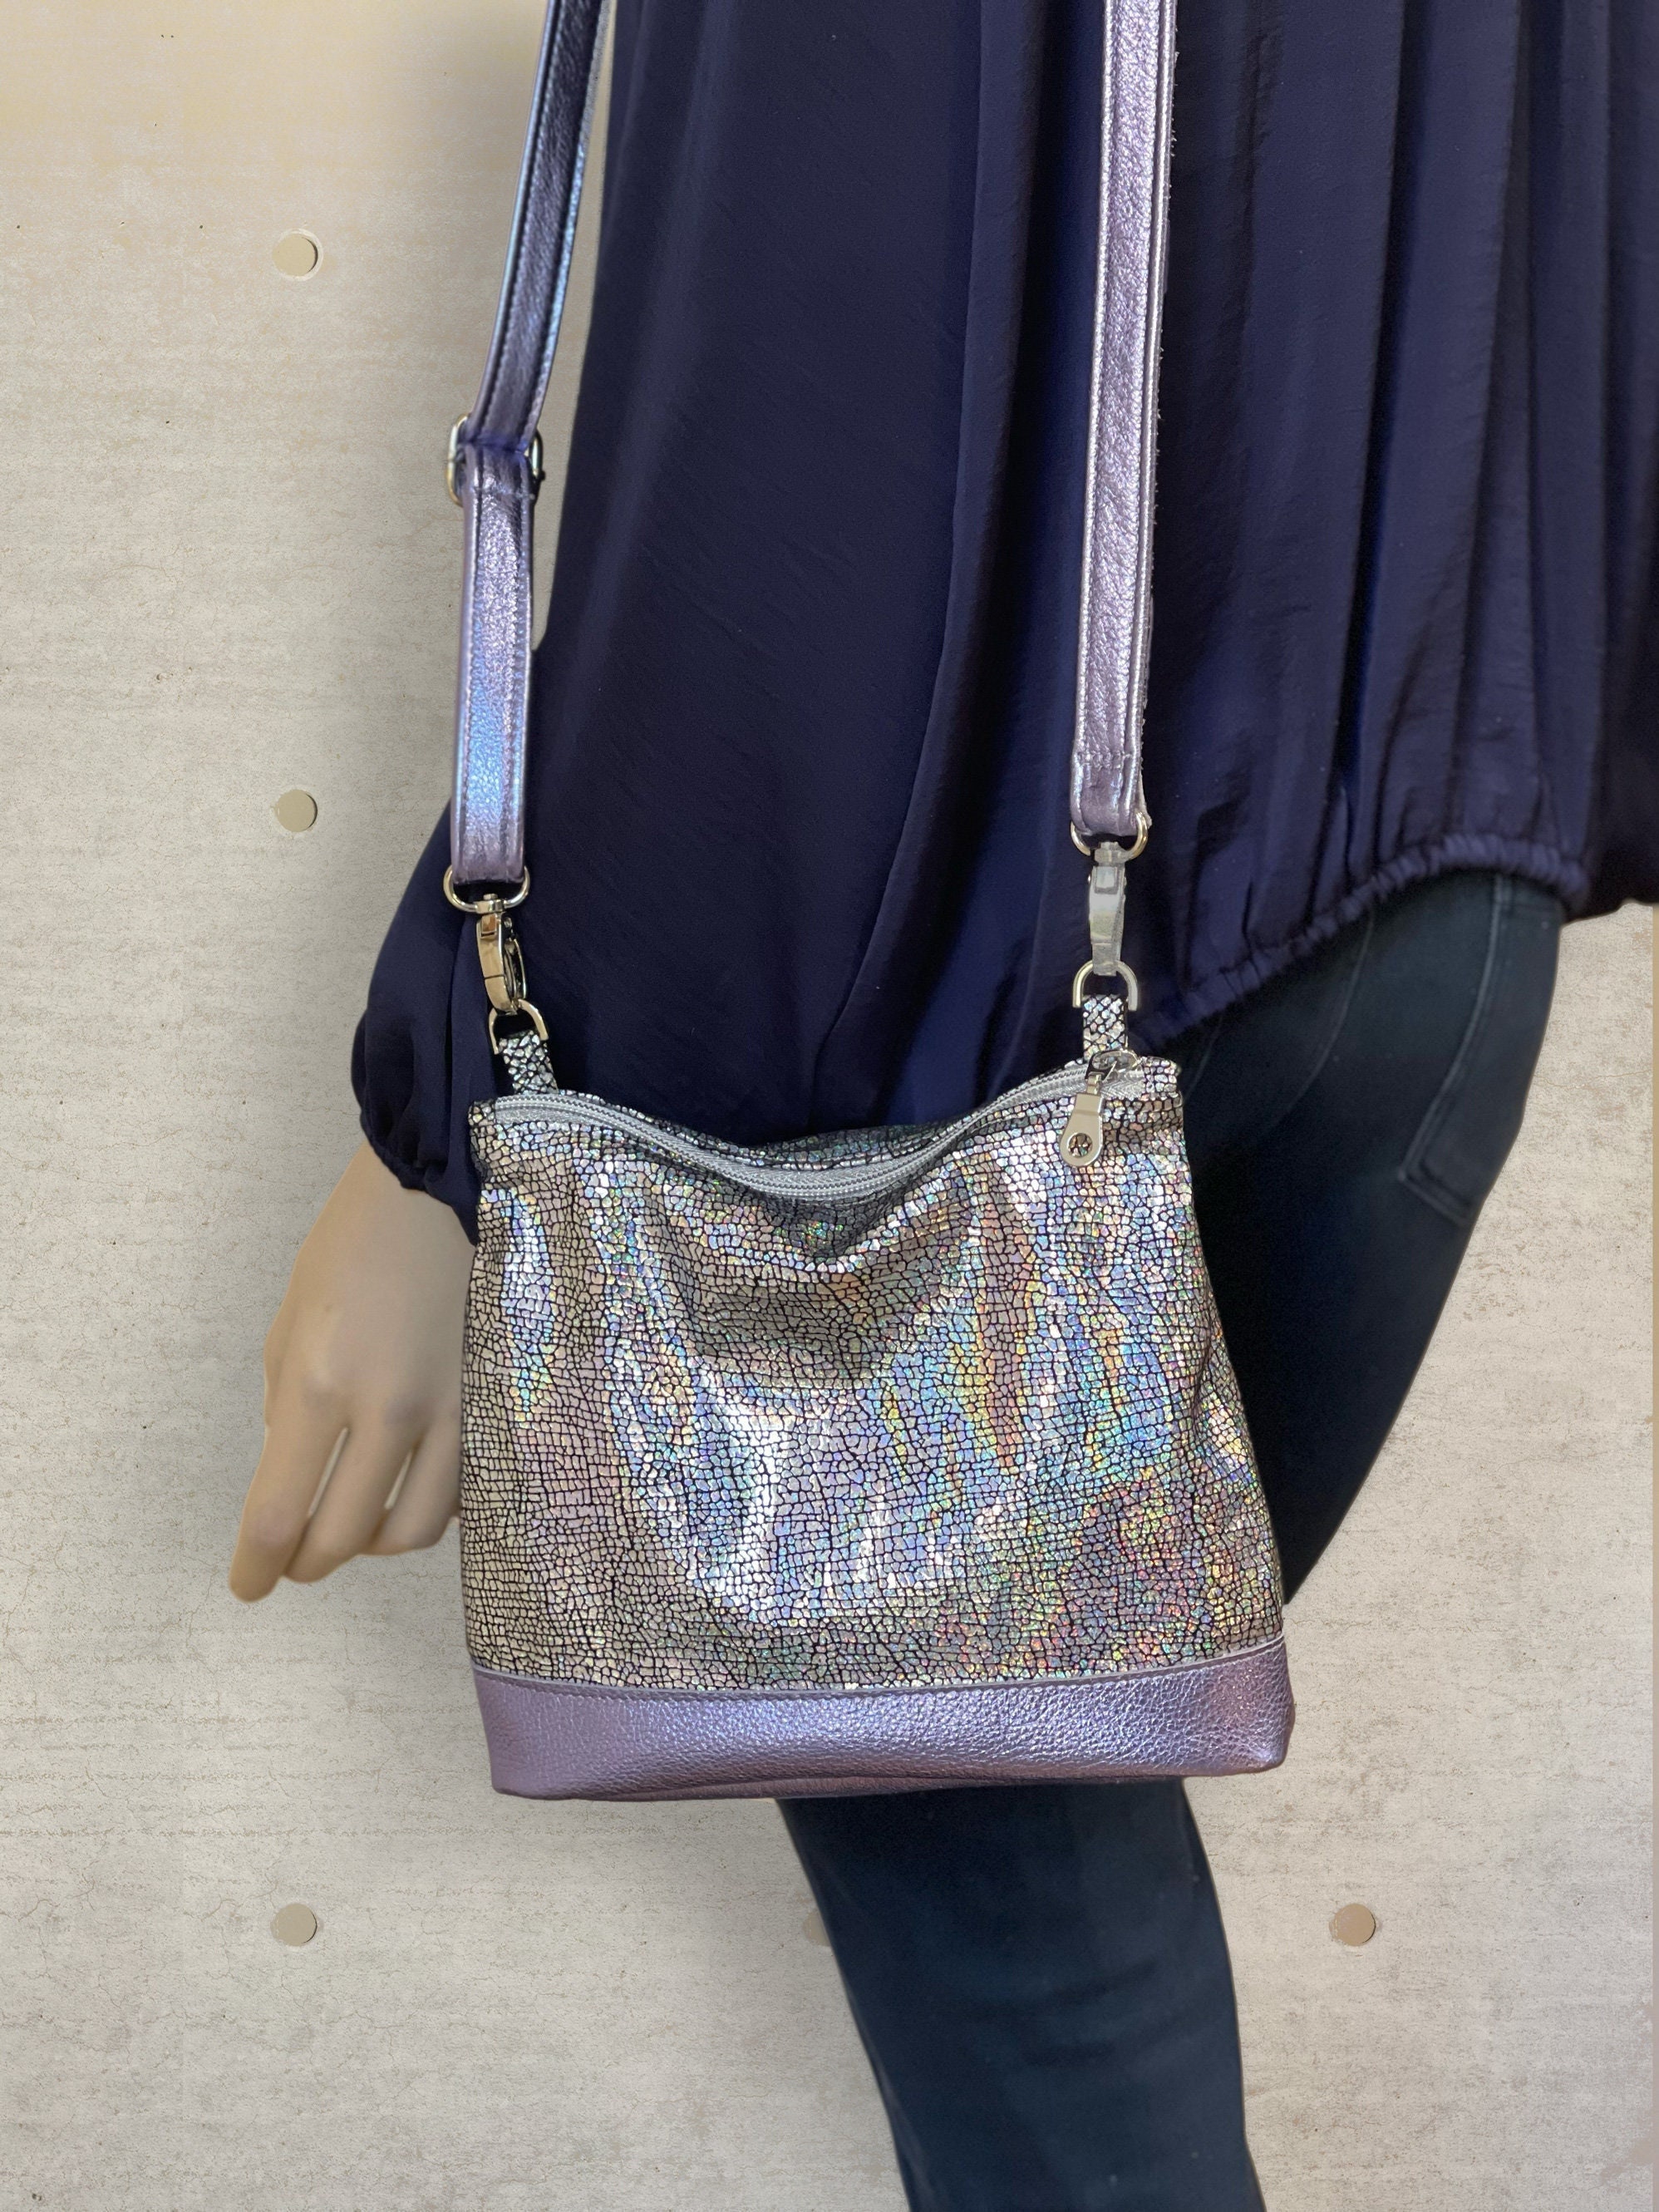 Holographic Iridescent Crossbody Bag, Small Lined Purse, Pocket, Soft Silver Purse, Zipper Closure, Soft Leather, Removable Adjustable Strap